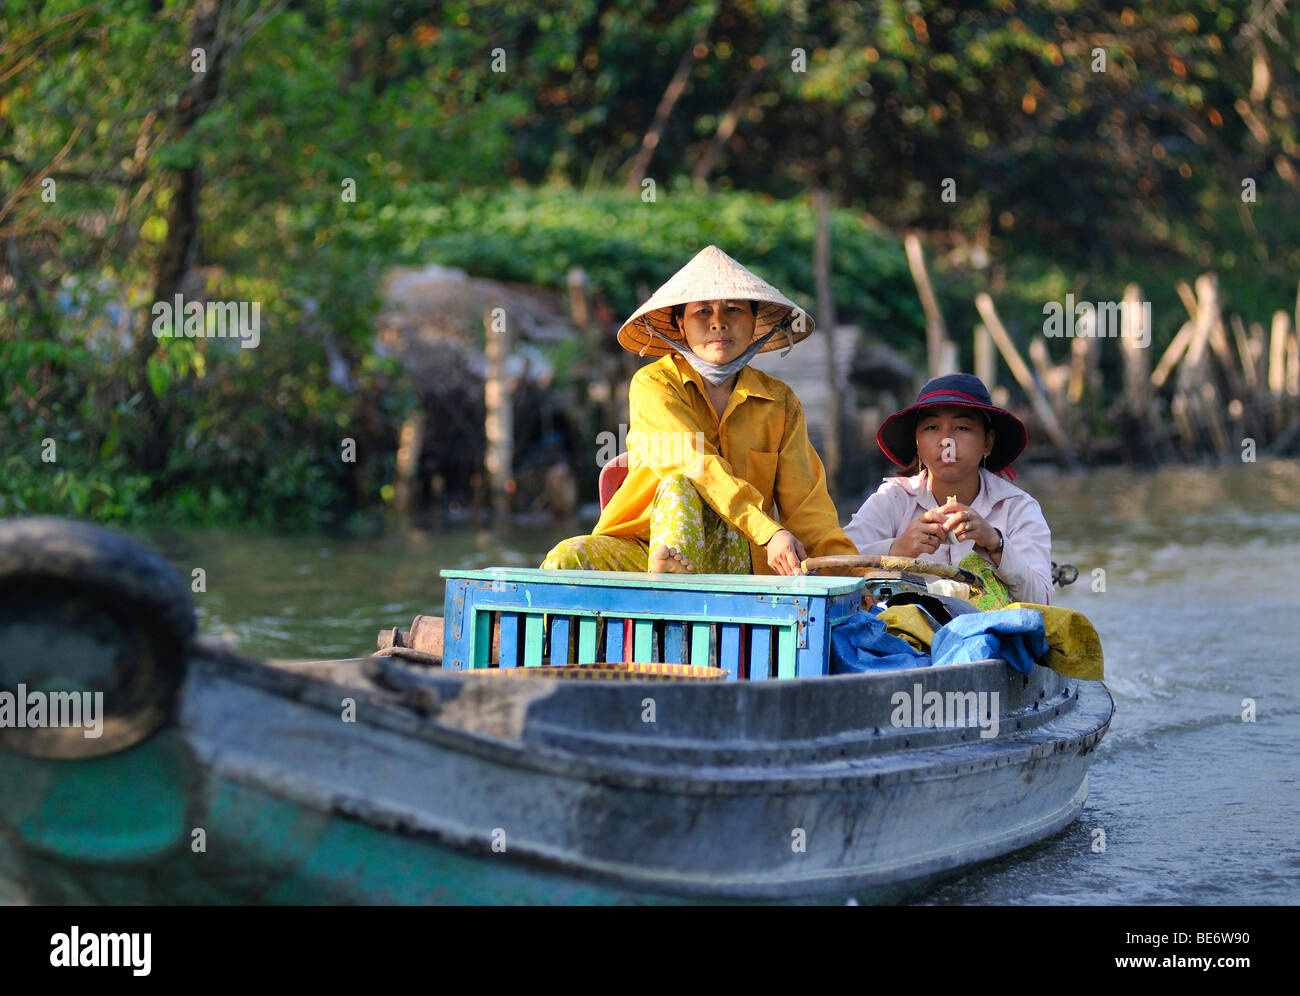 Two women wearing traditional Vietnamese straw hats in a boat on the Mekong River, Vinh Long, Mekong Delta, Vietnam, Asia Stock Photo